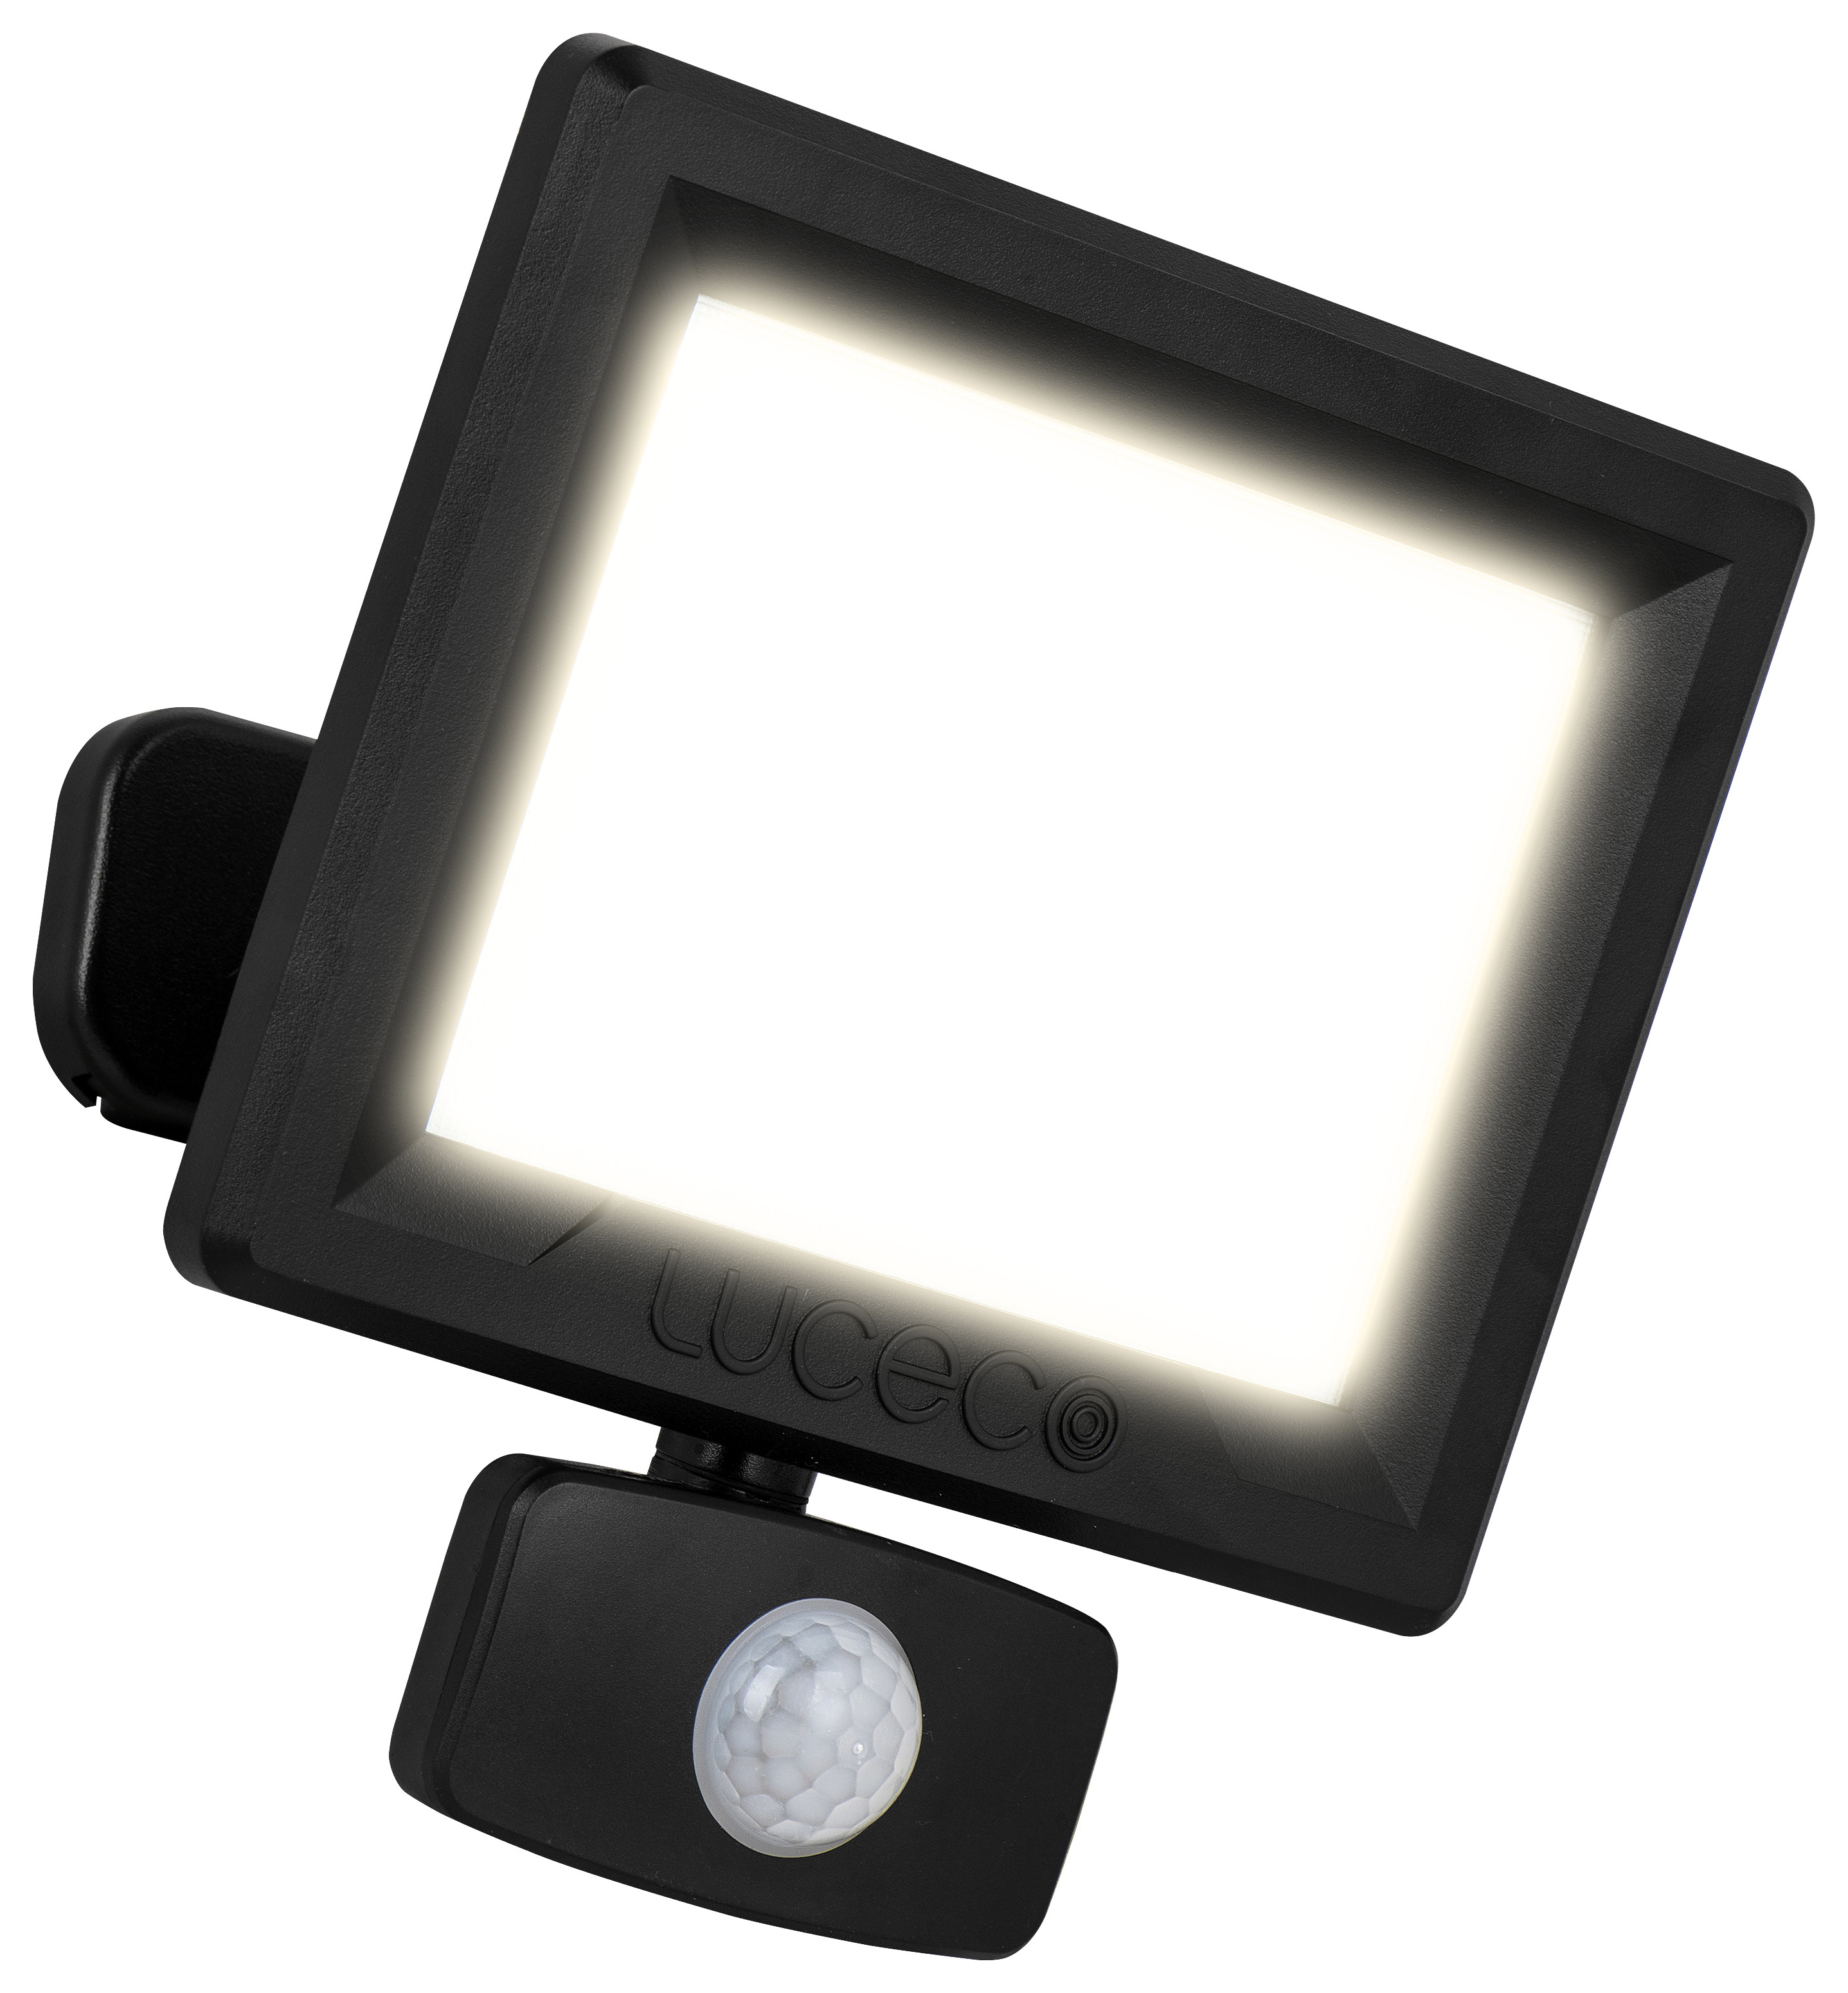 Luceco IP65 Black PIR Floodlight with Ball Joint - 30W